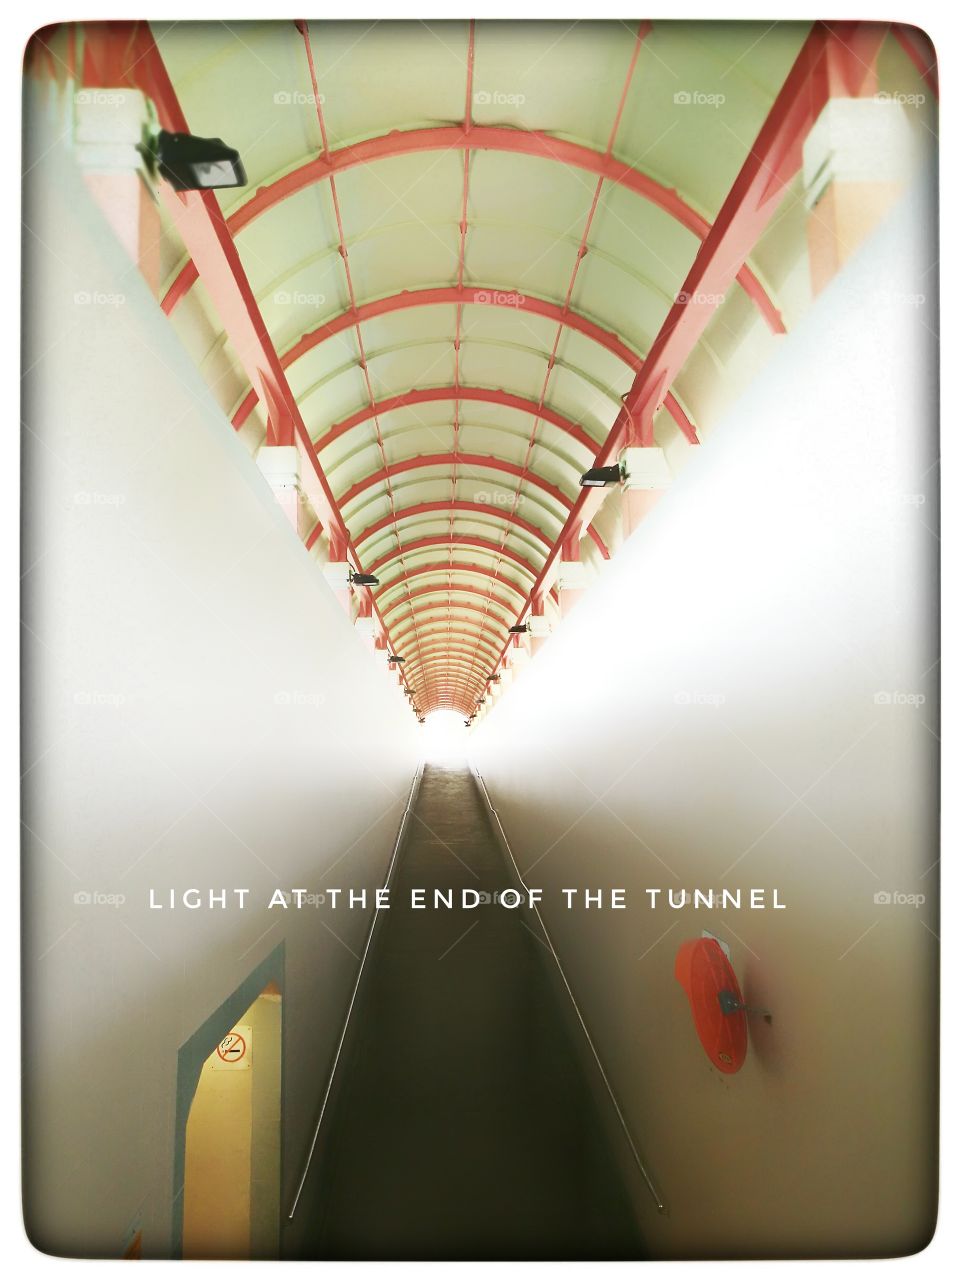 A bright tunnel will still have light at the end of it.